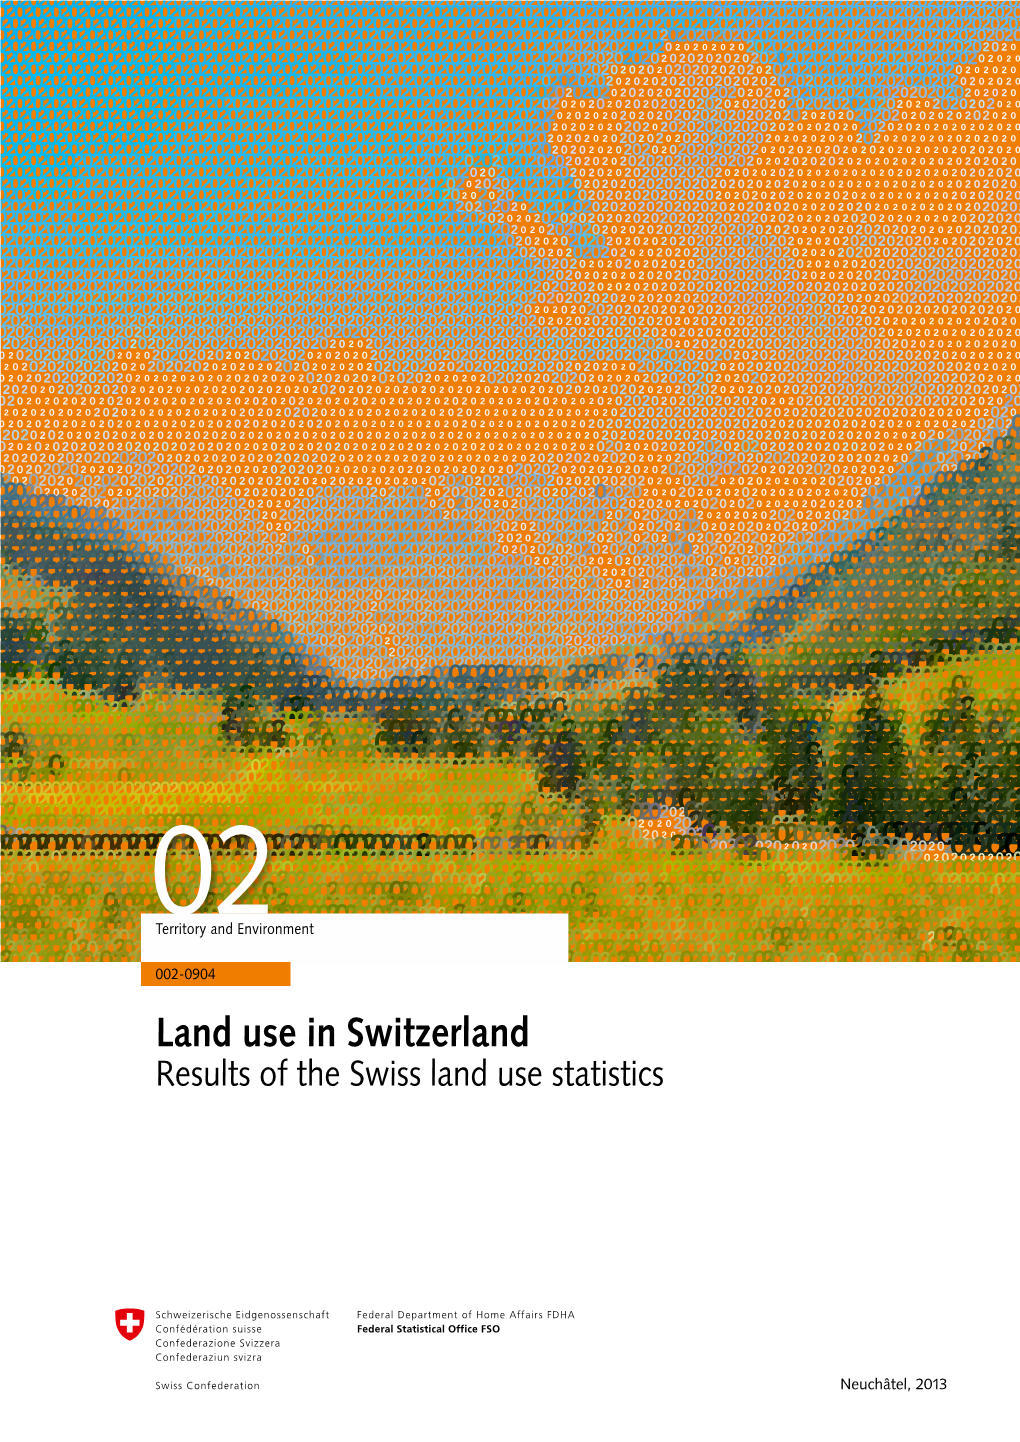 Land Use in Switzerland Results of the Swiss Land Use Statistics